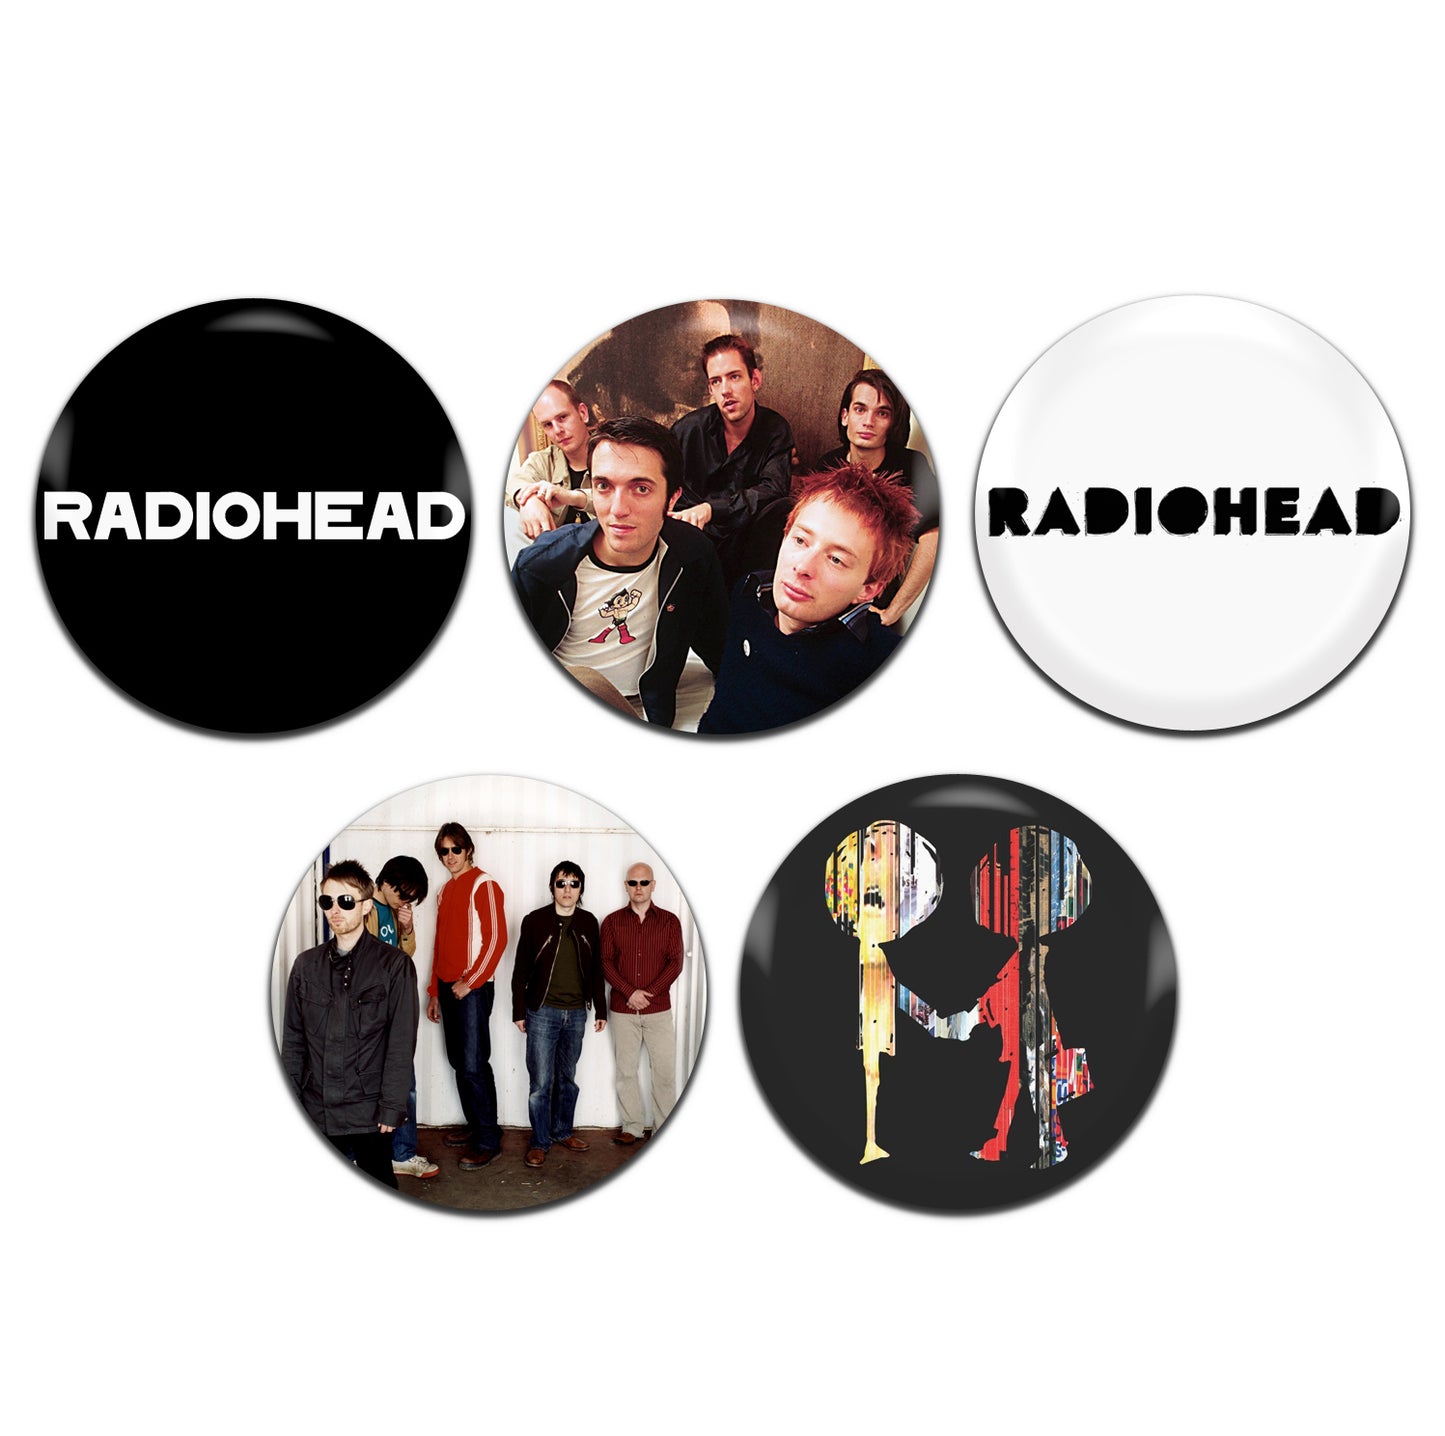 Radiohead Indie Alternative Rock 90's 25mm / 1 Inch D-Pin Button Badges (5x Set)